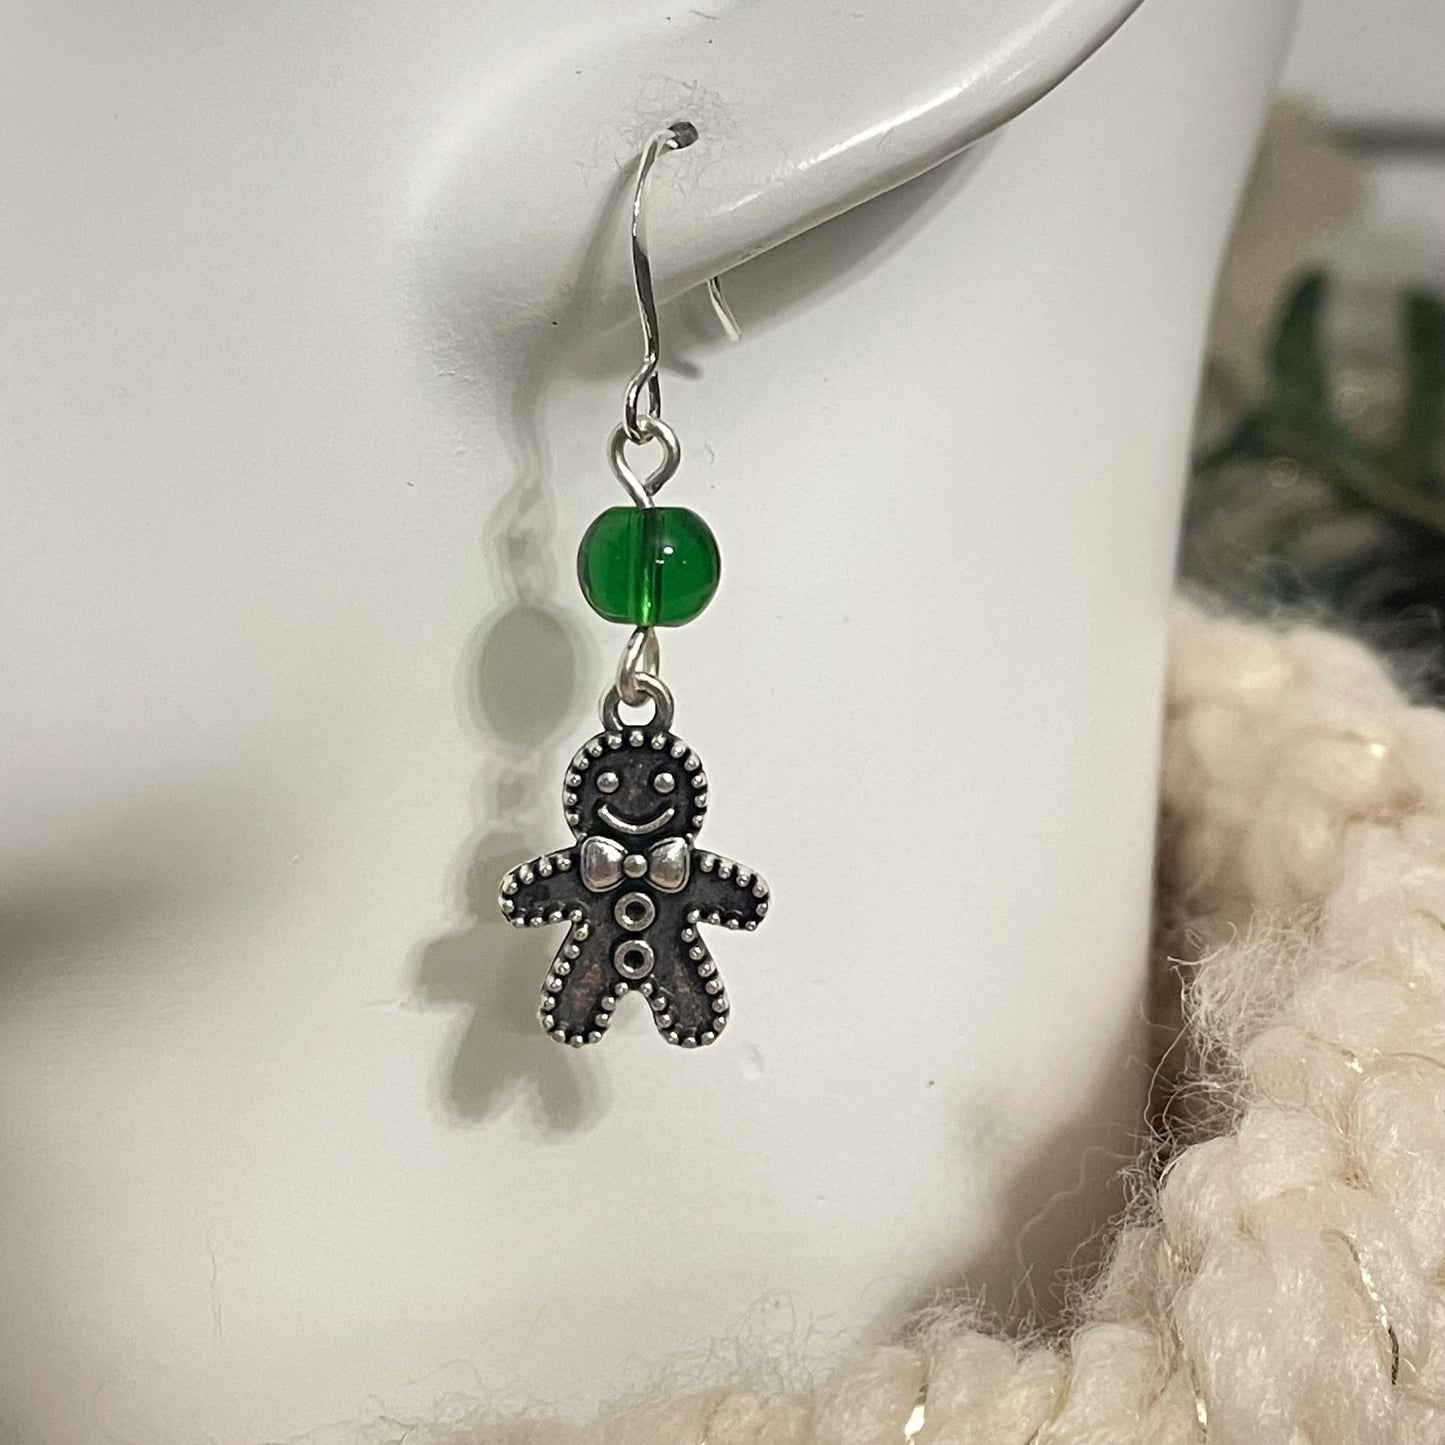 Handmade Gingerbread Charm Earrings Round Bead Accent Holiday Christmas Stocking December Secret Santa Mixed Metal Green Glass